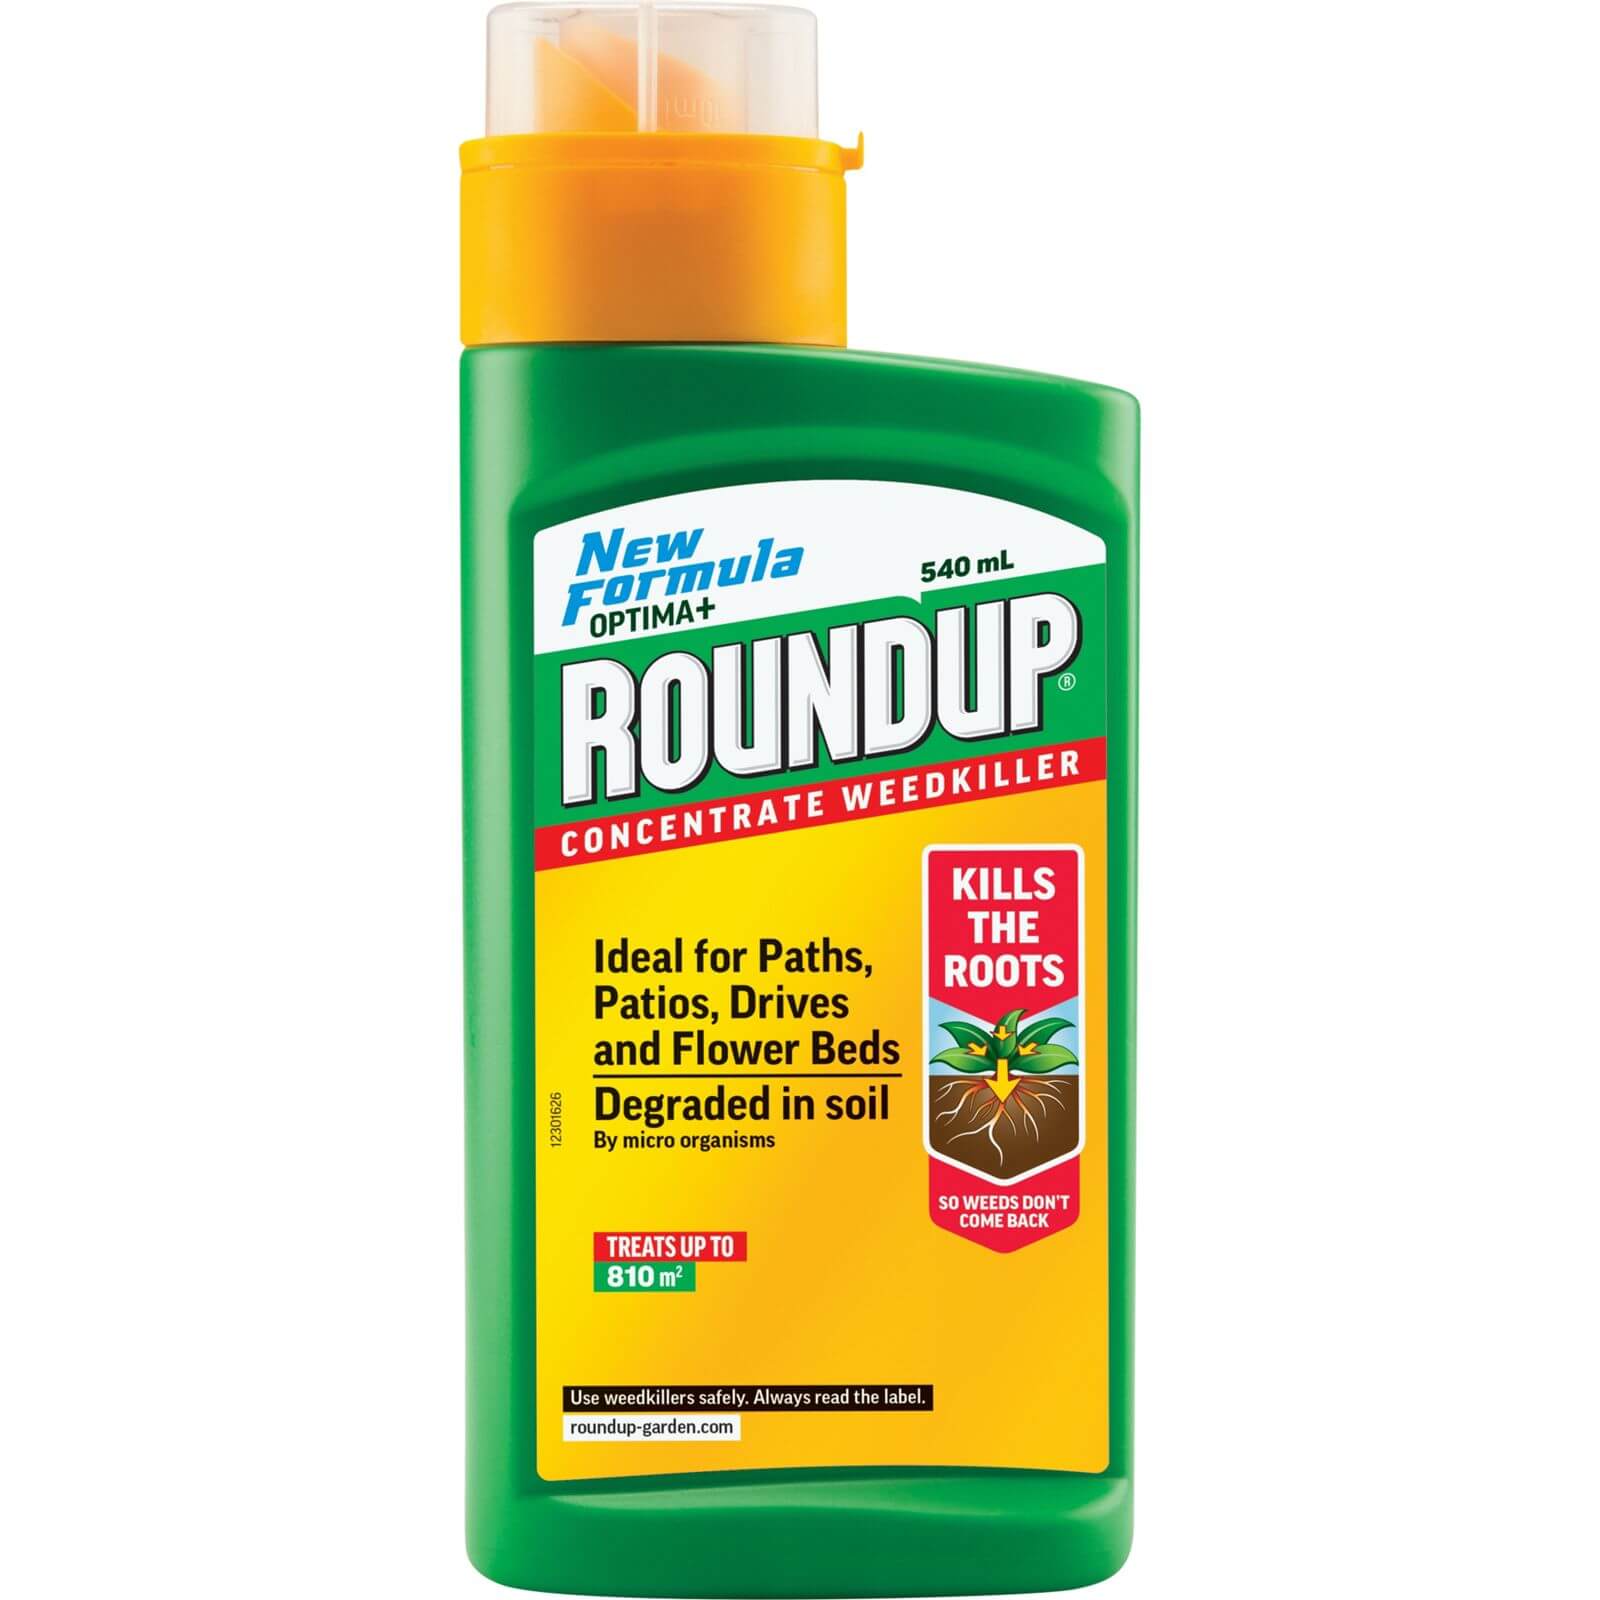 Roundup Total Concentrate Weedkiller - 540ml